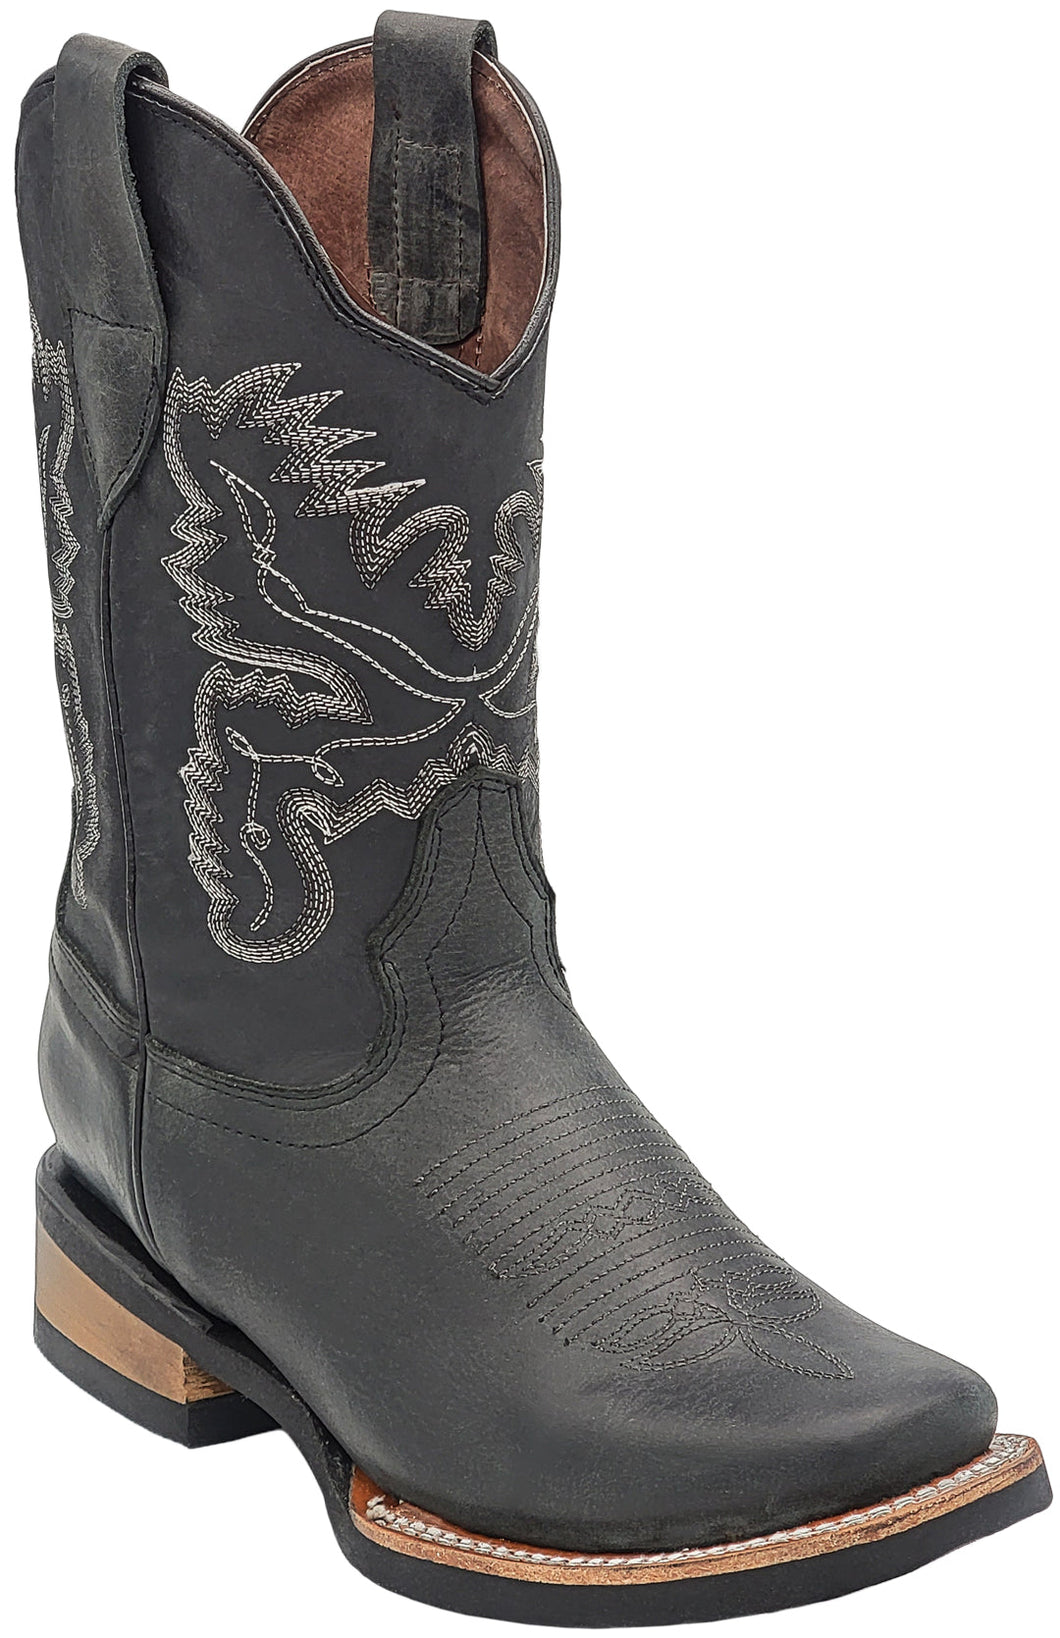 Silverton Fremont All Leather Square Toe Boots (Black)